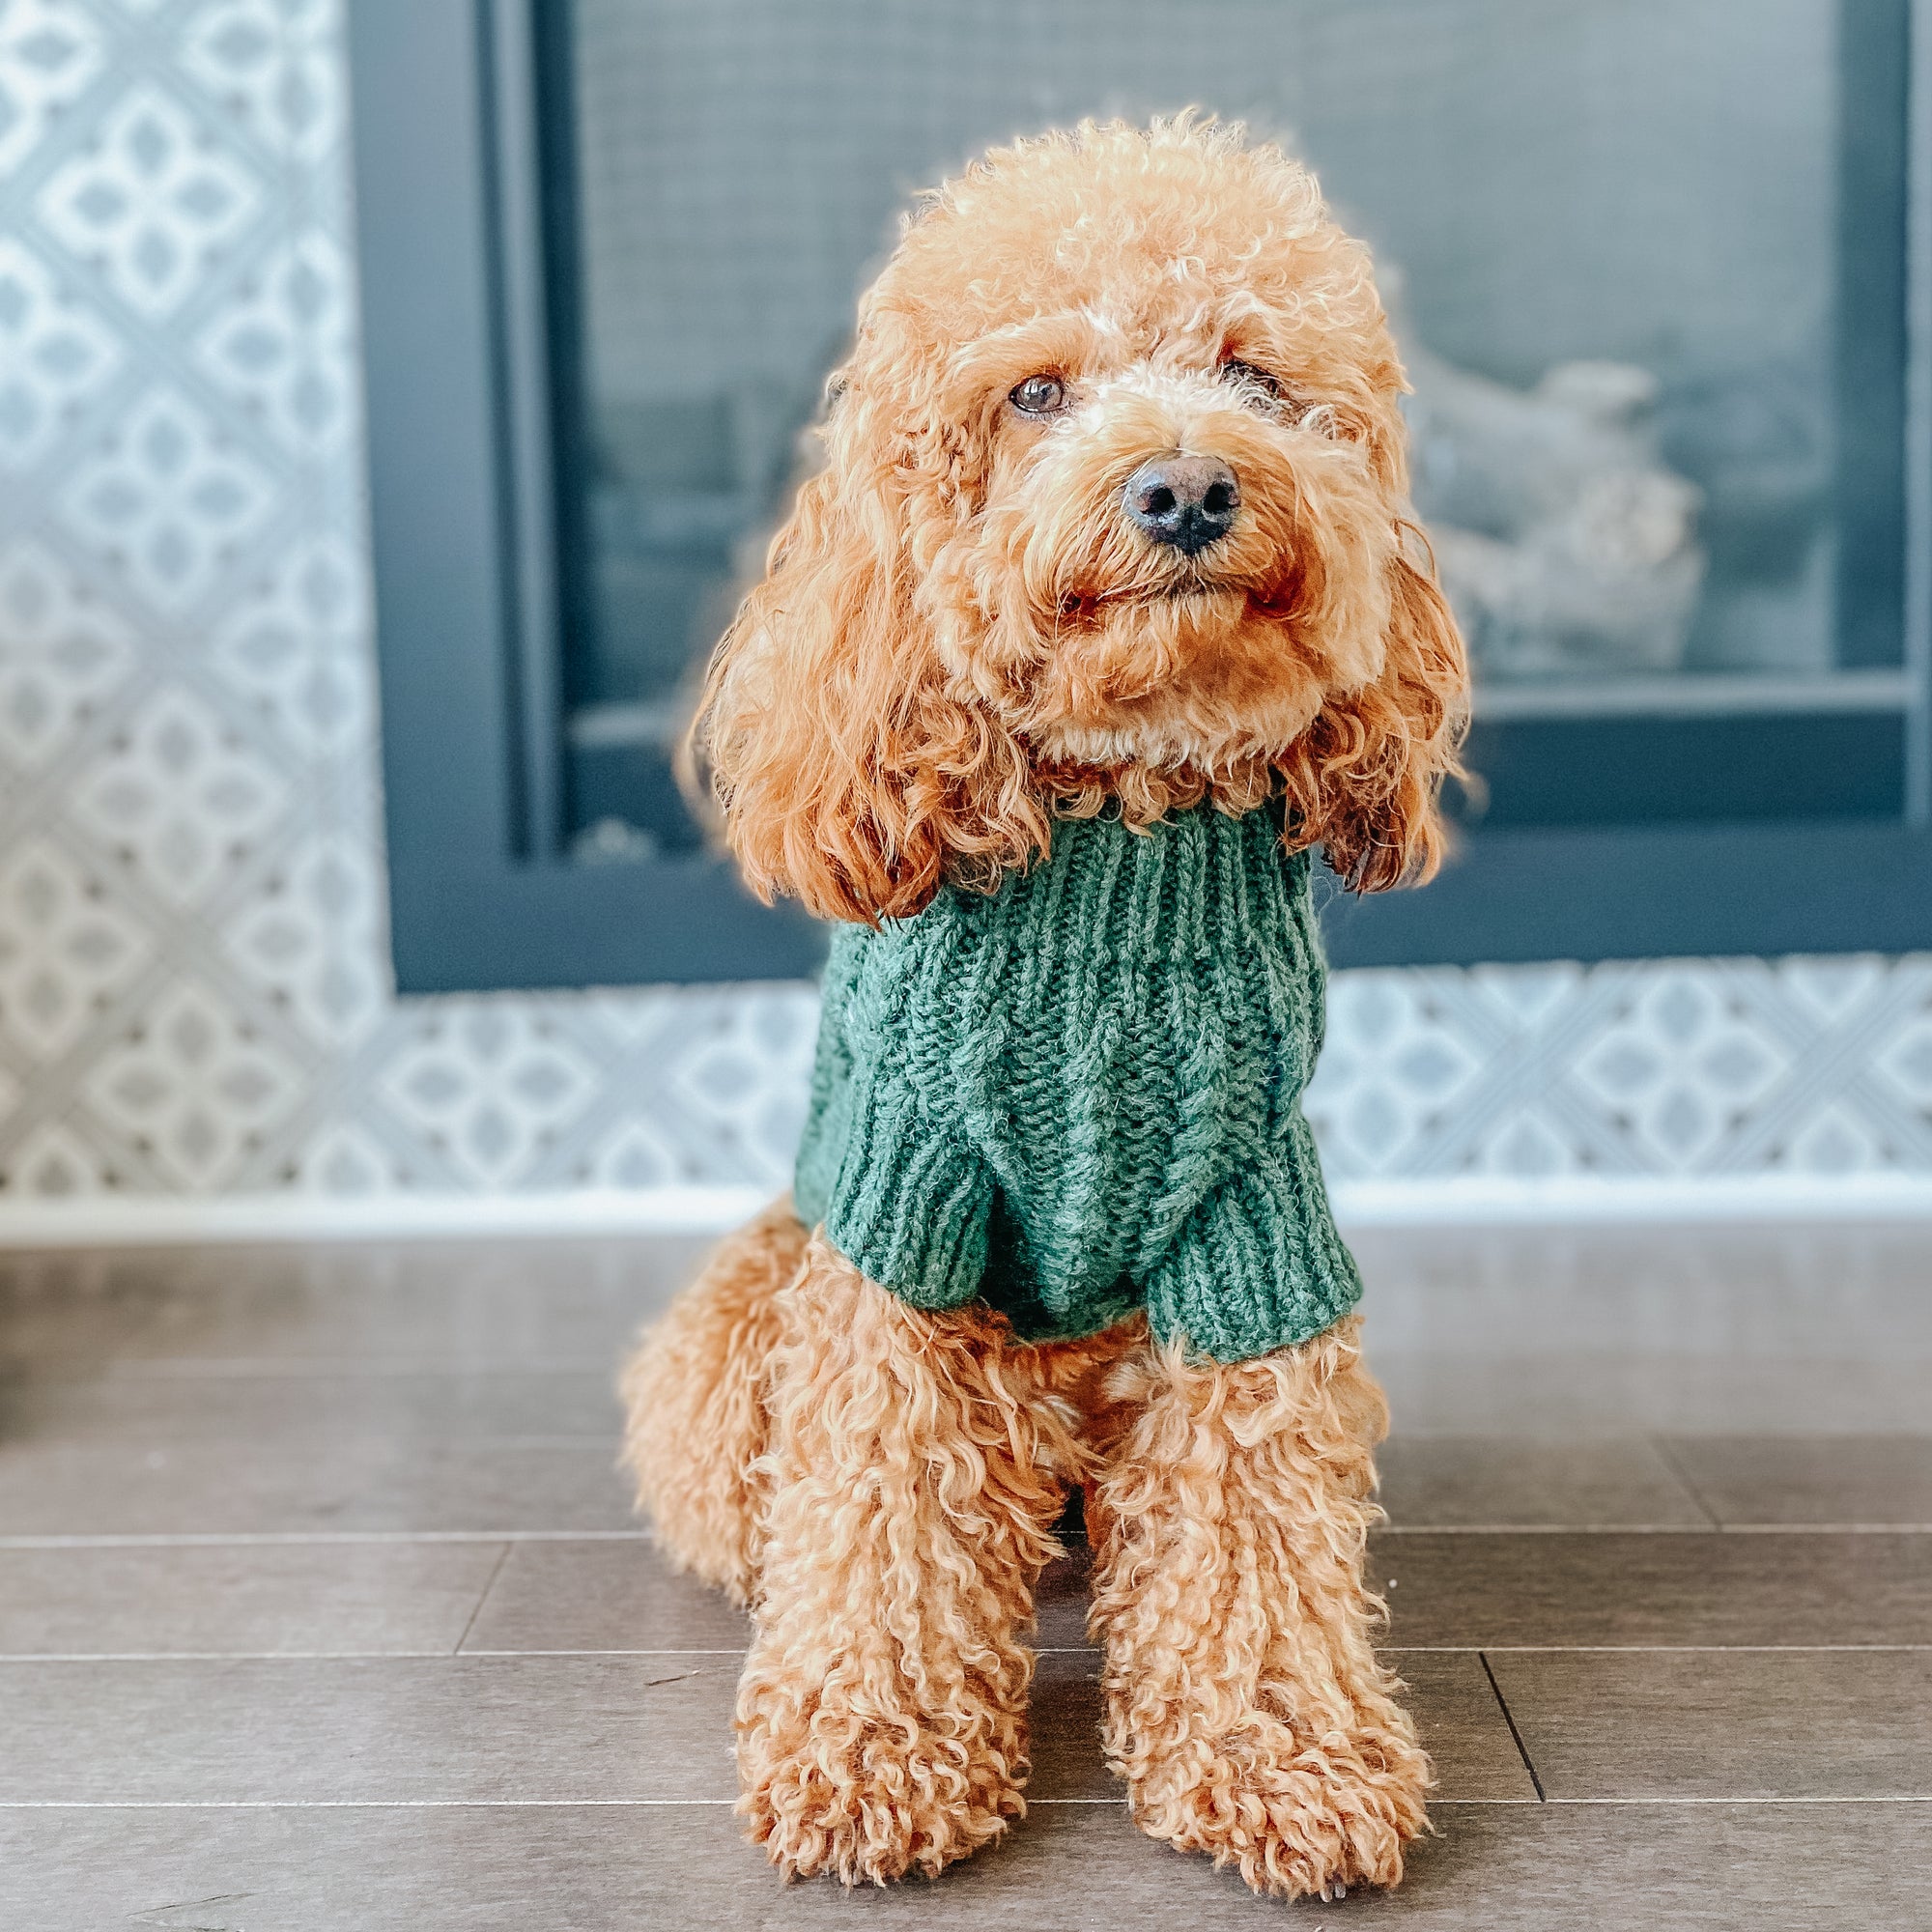 INFLUENCER_CONTENT | @GEORGIE.THECAVAPOO | SIZE M